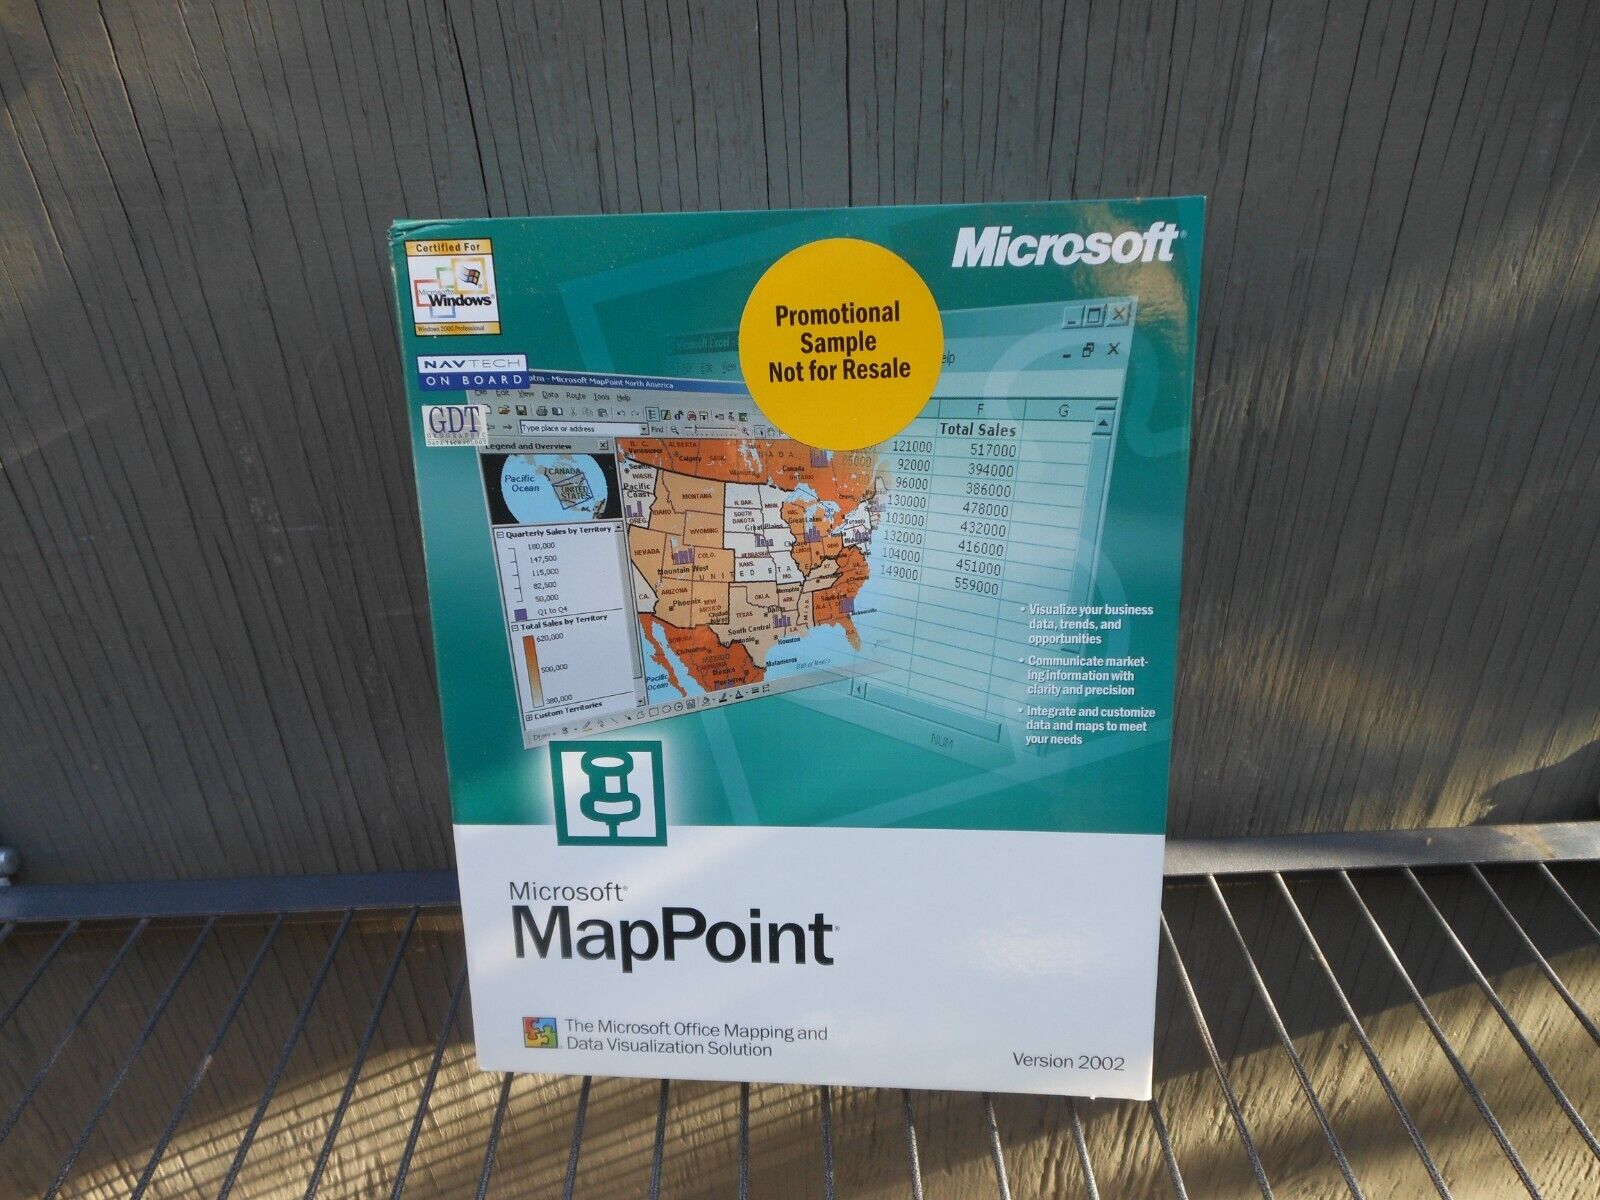 Microsoft MapPoint Version 2002 Promotional Sample (Sealed NEW) 12D